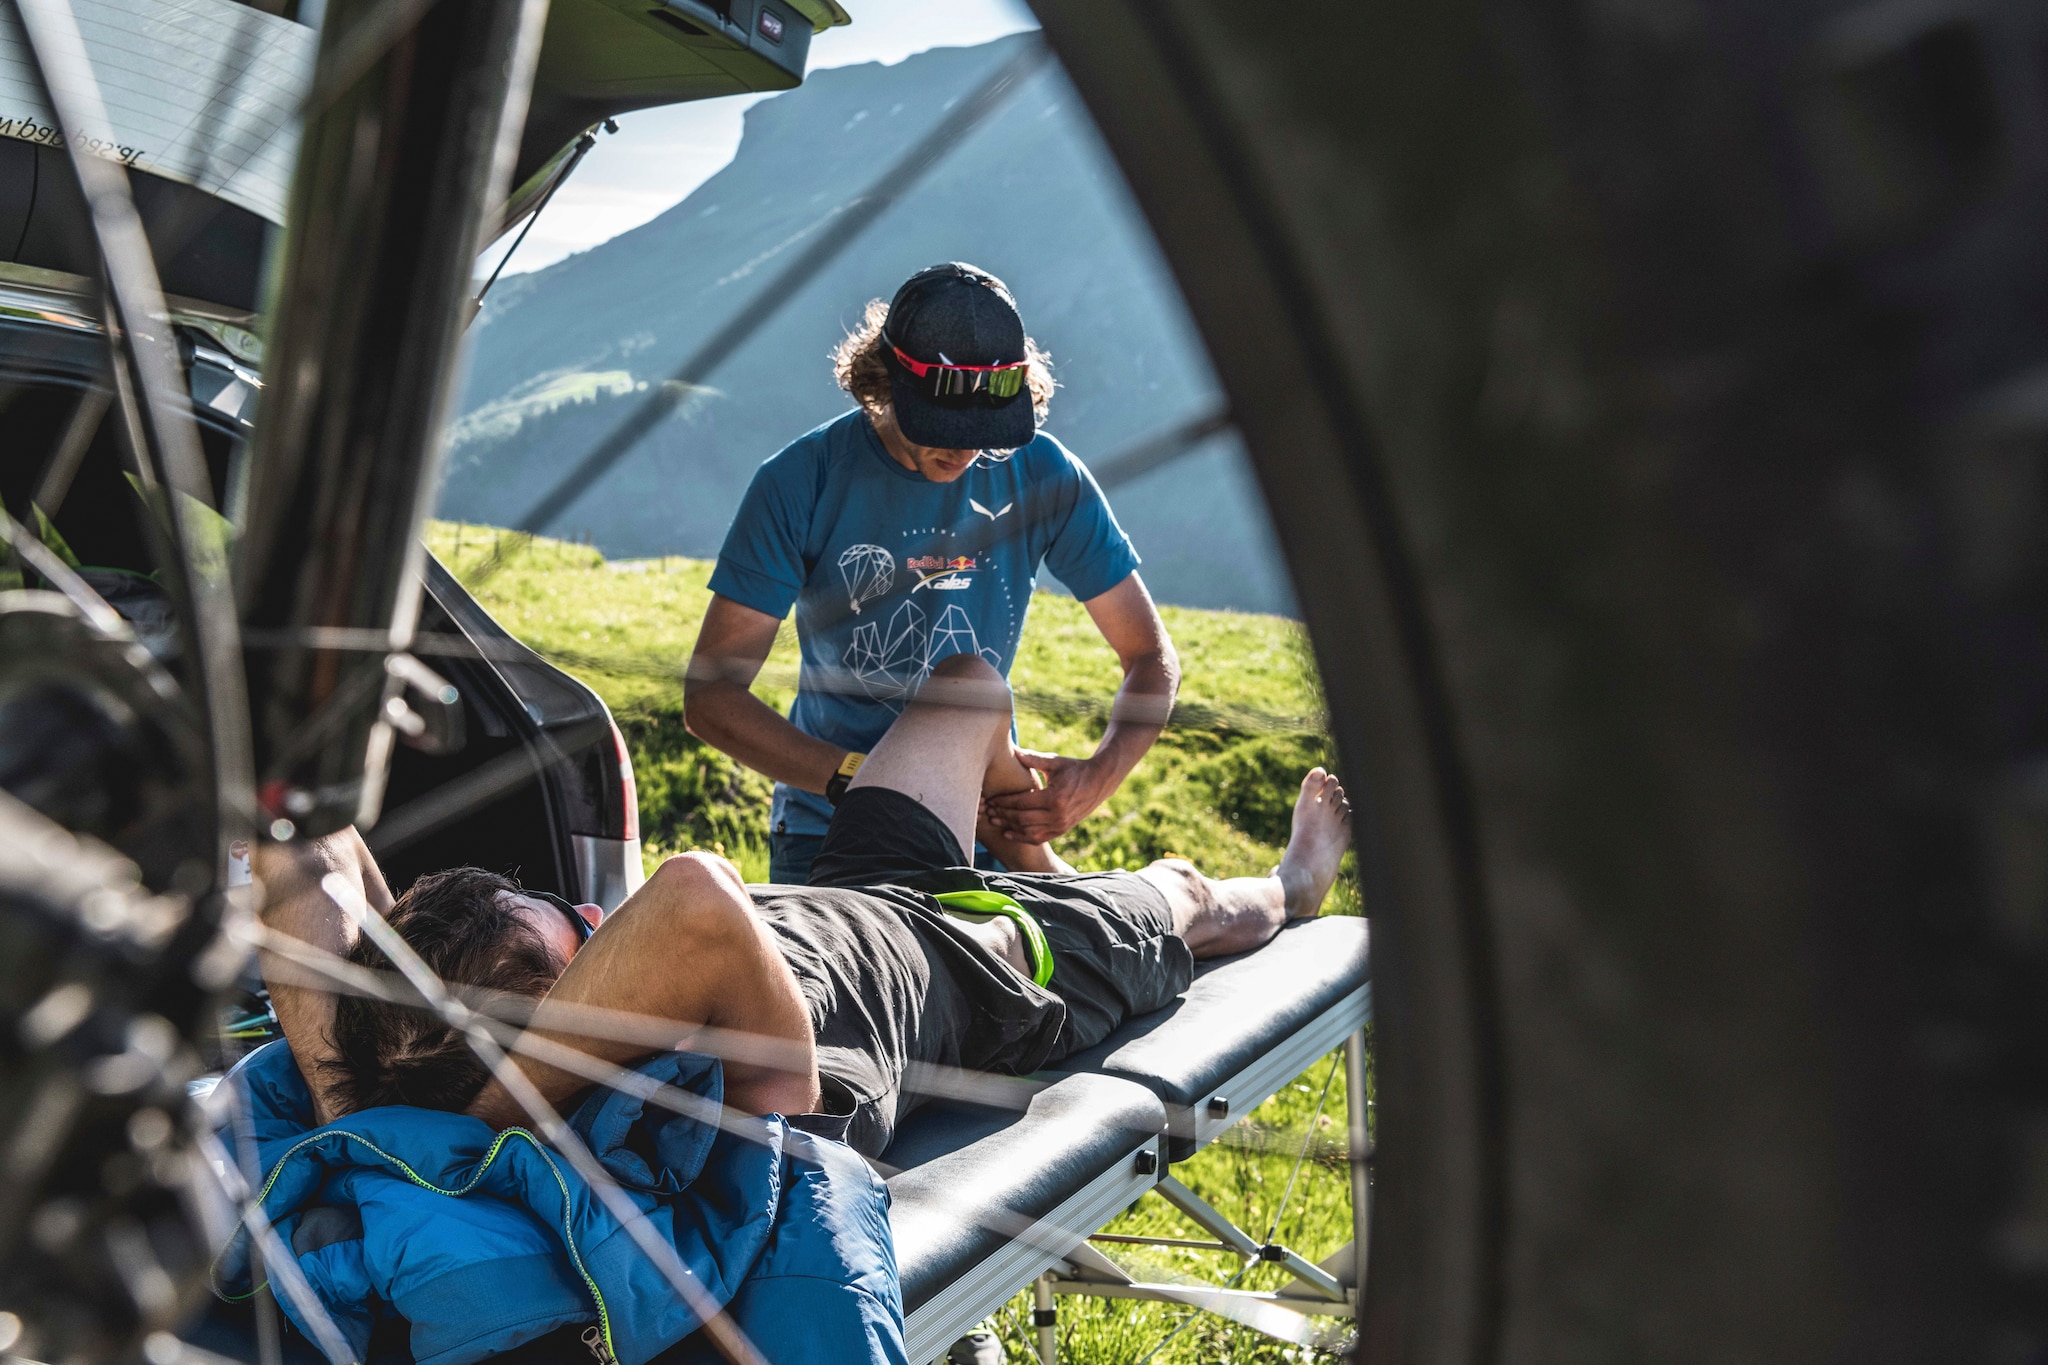 Aaron Durogati (ITA1) is getting last checks before the start of the Red Bull X-Alps in Flumet, France on June 24, 2019